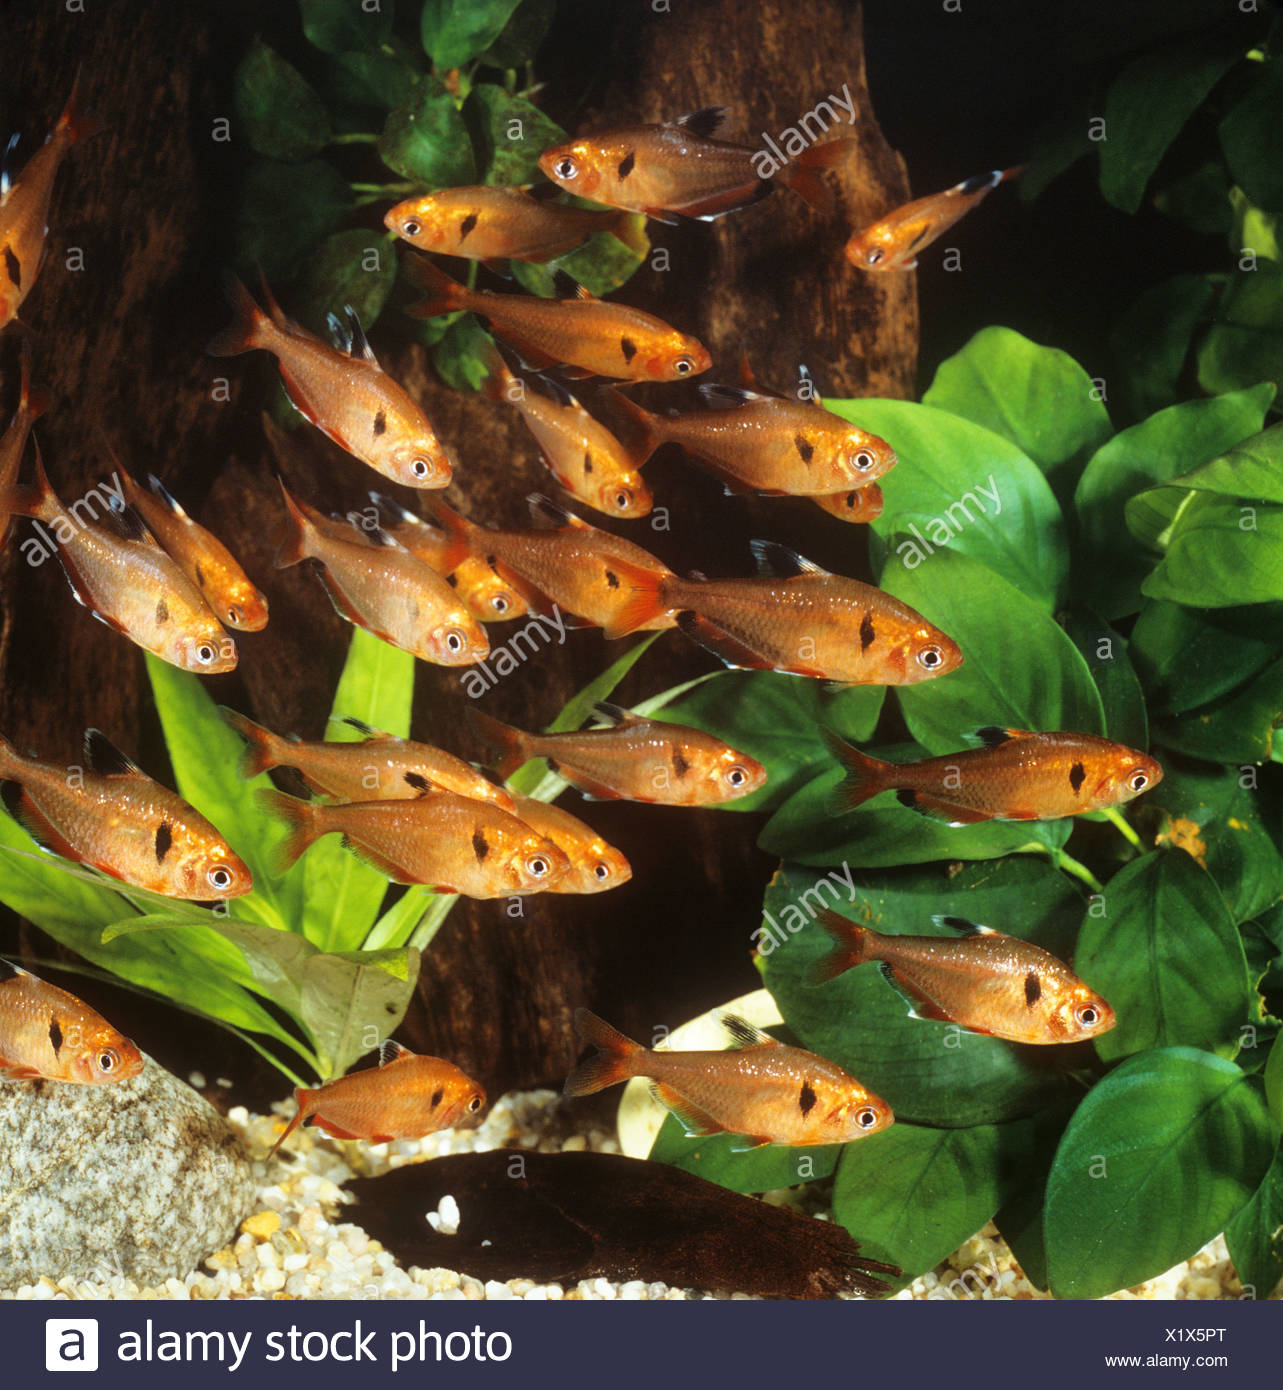 Shoal Of Serpae Tetras Hyphessobrycon Serpae Stock Photo Alamy,What Is Whey